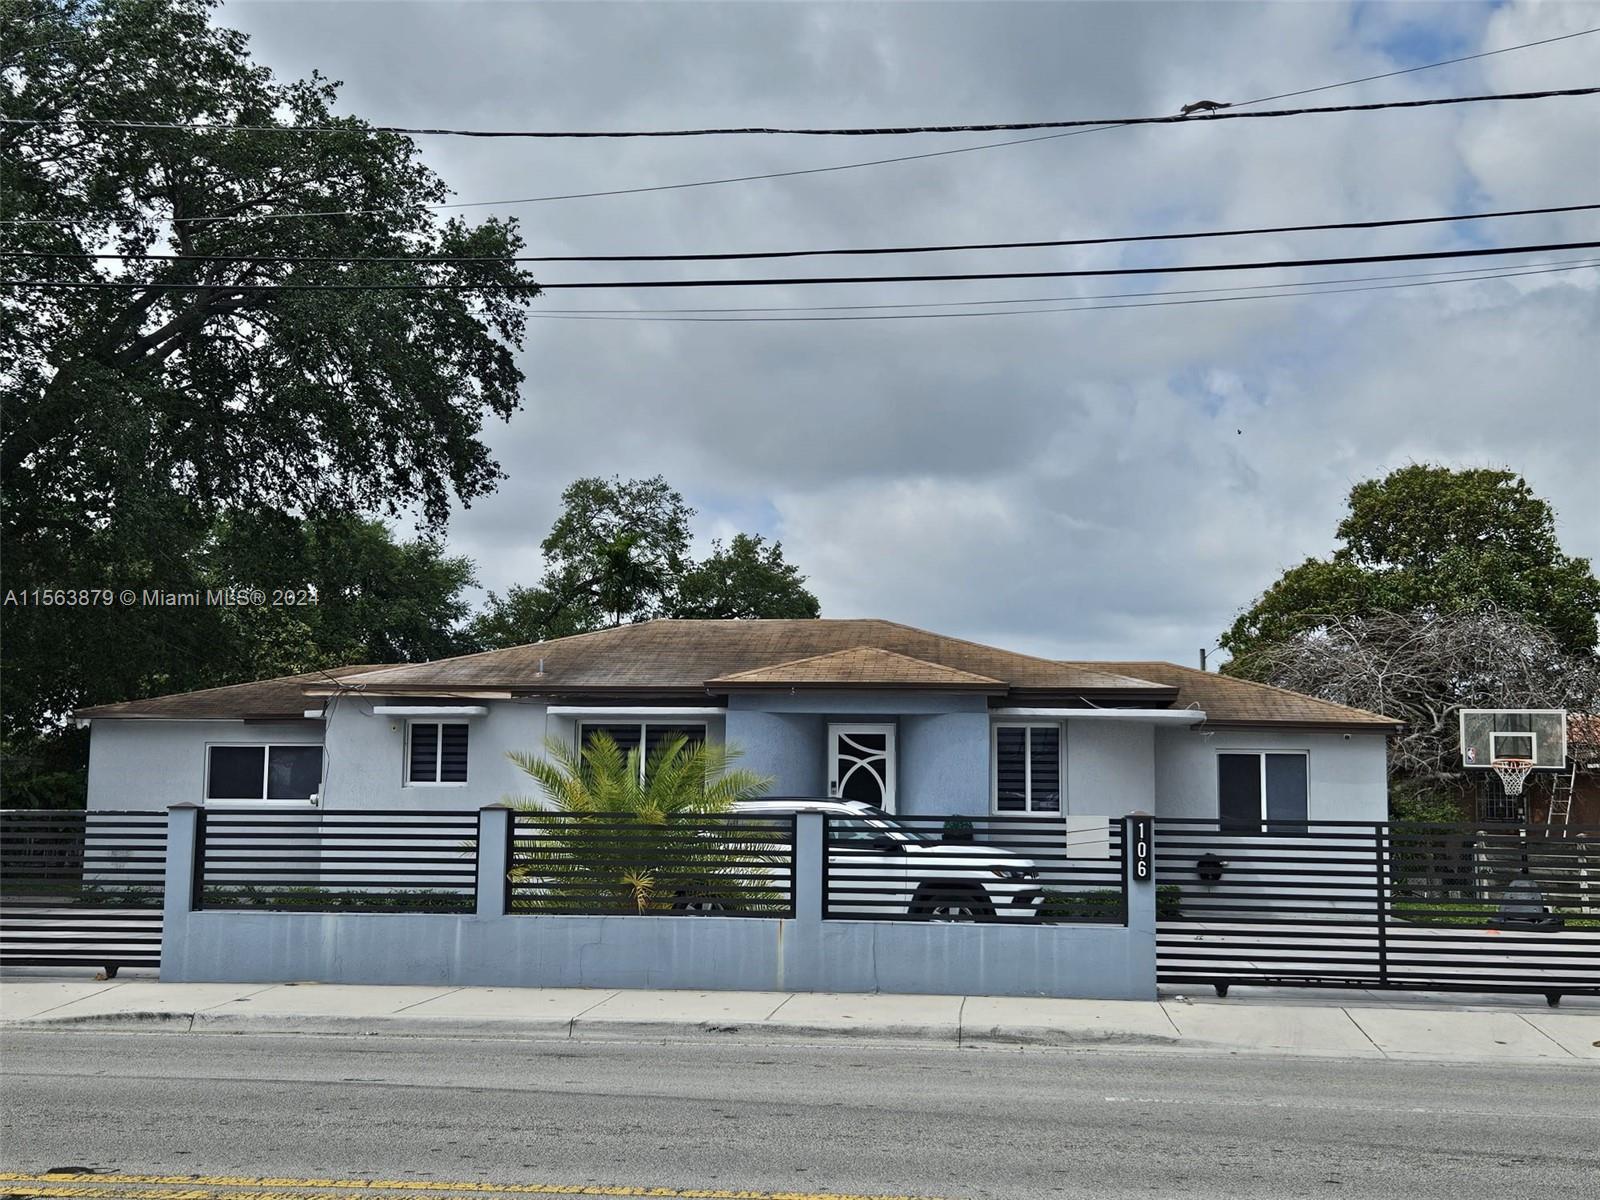 Address Not Disclosed, Hialeah, Miami-Dade County, Florida - 4 Bedrooms  
3 Bathrooms - 